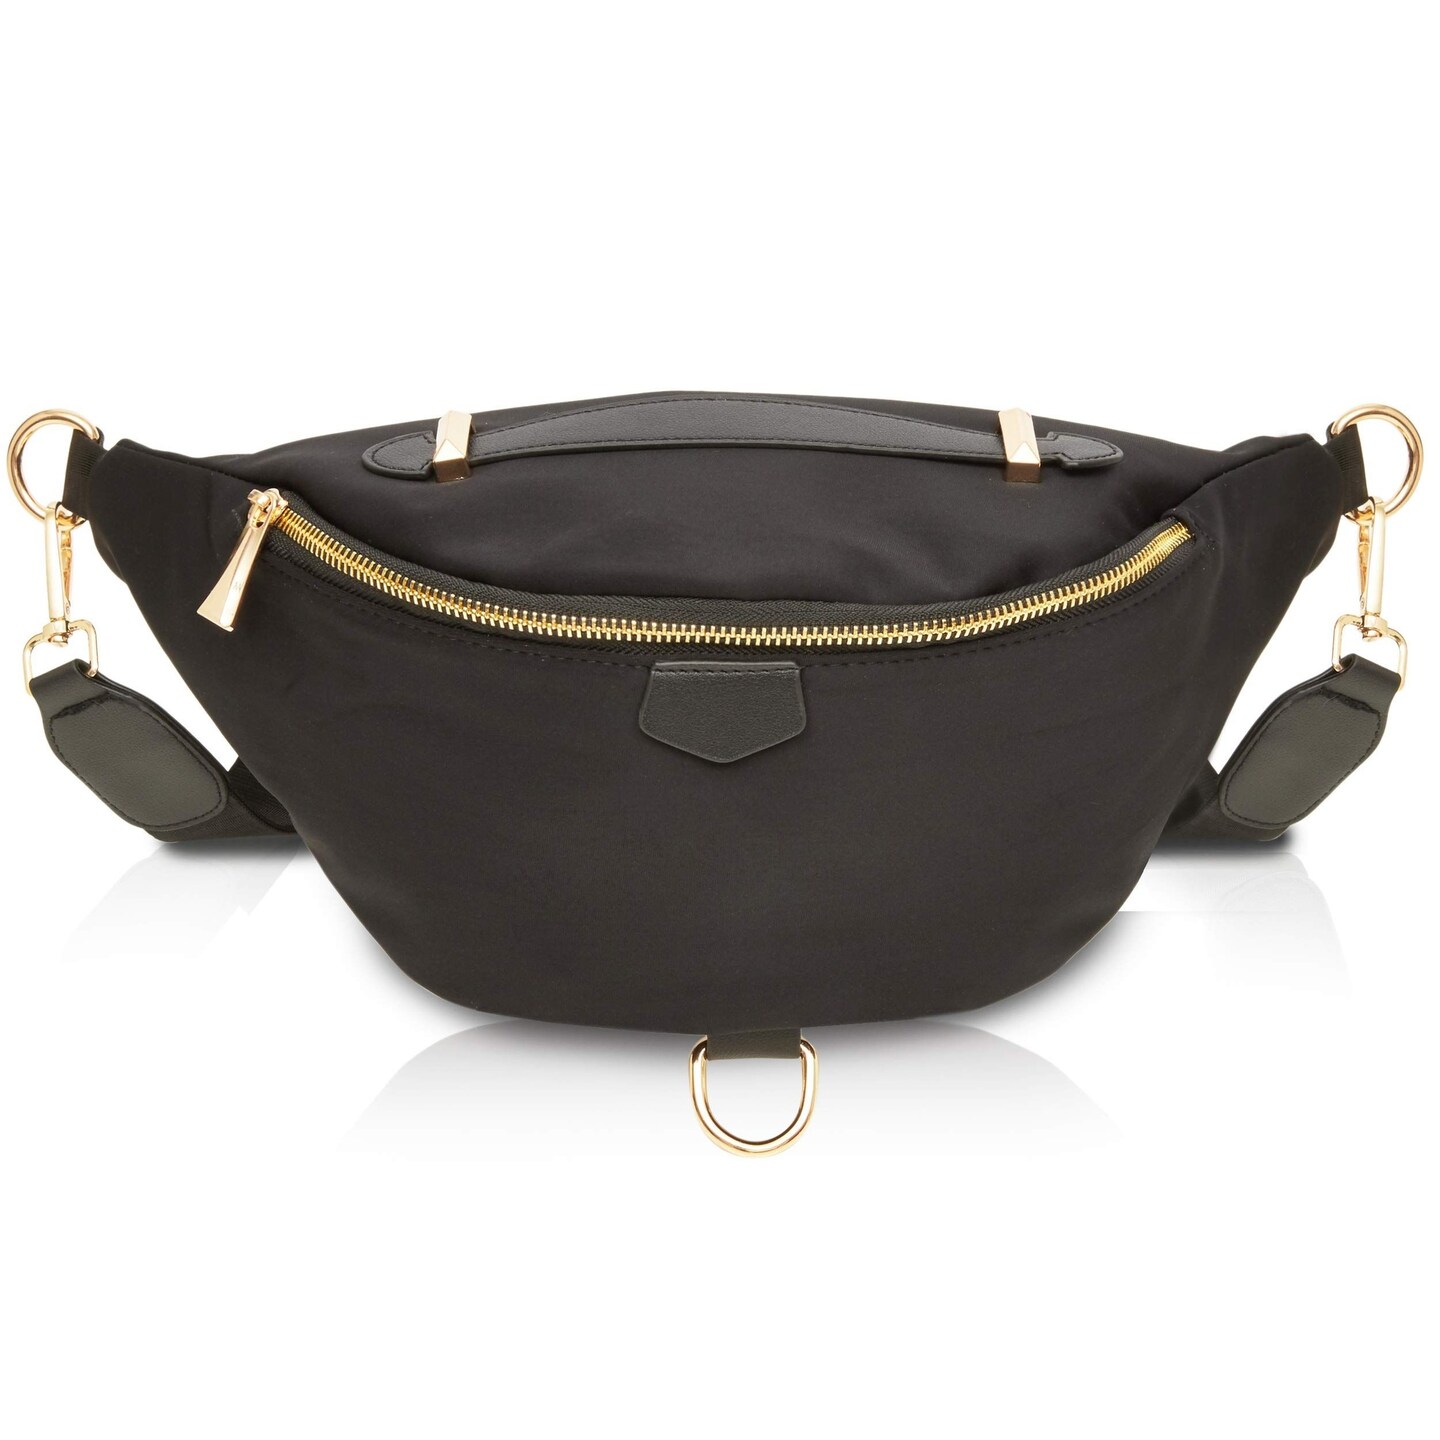 Zodaca Plus Size Black Fanny Pack, Crossbody Bag with Adjustable Belt Straps Fits 34-60 inch Waist (expands to 5XL)